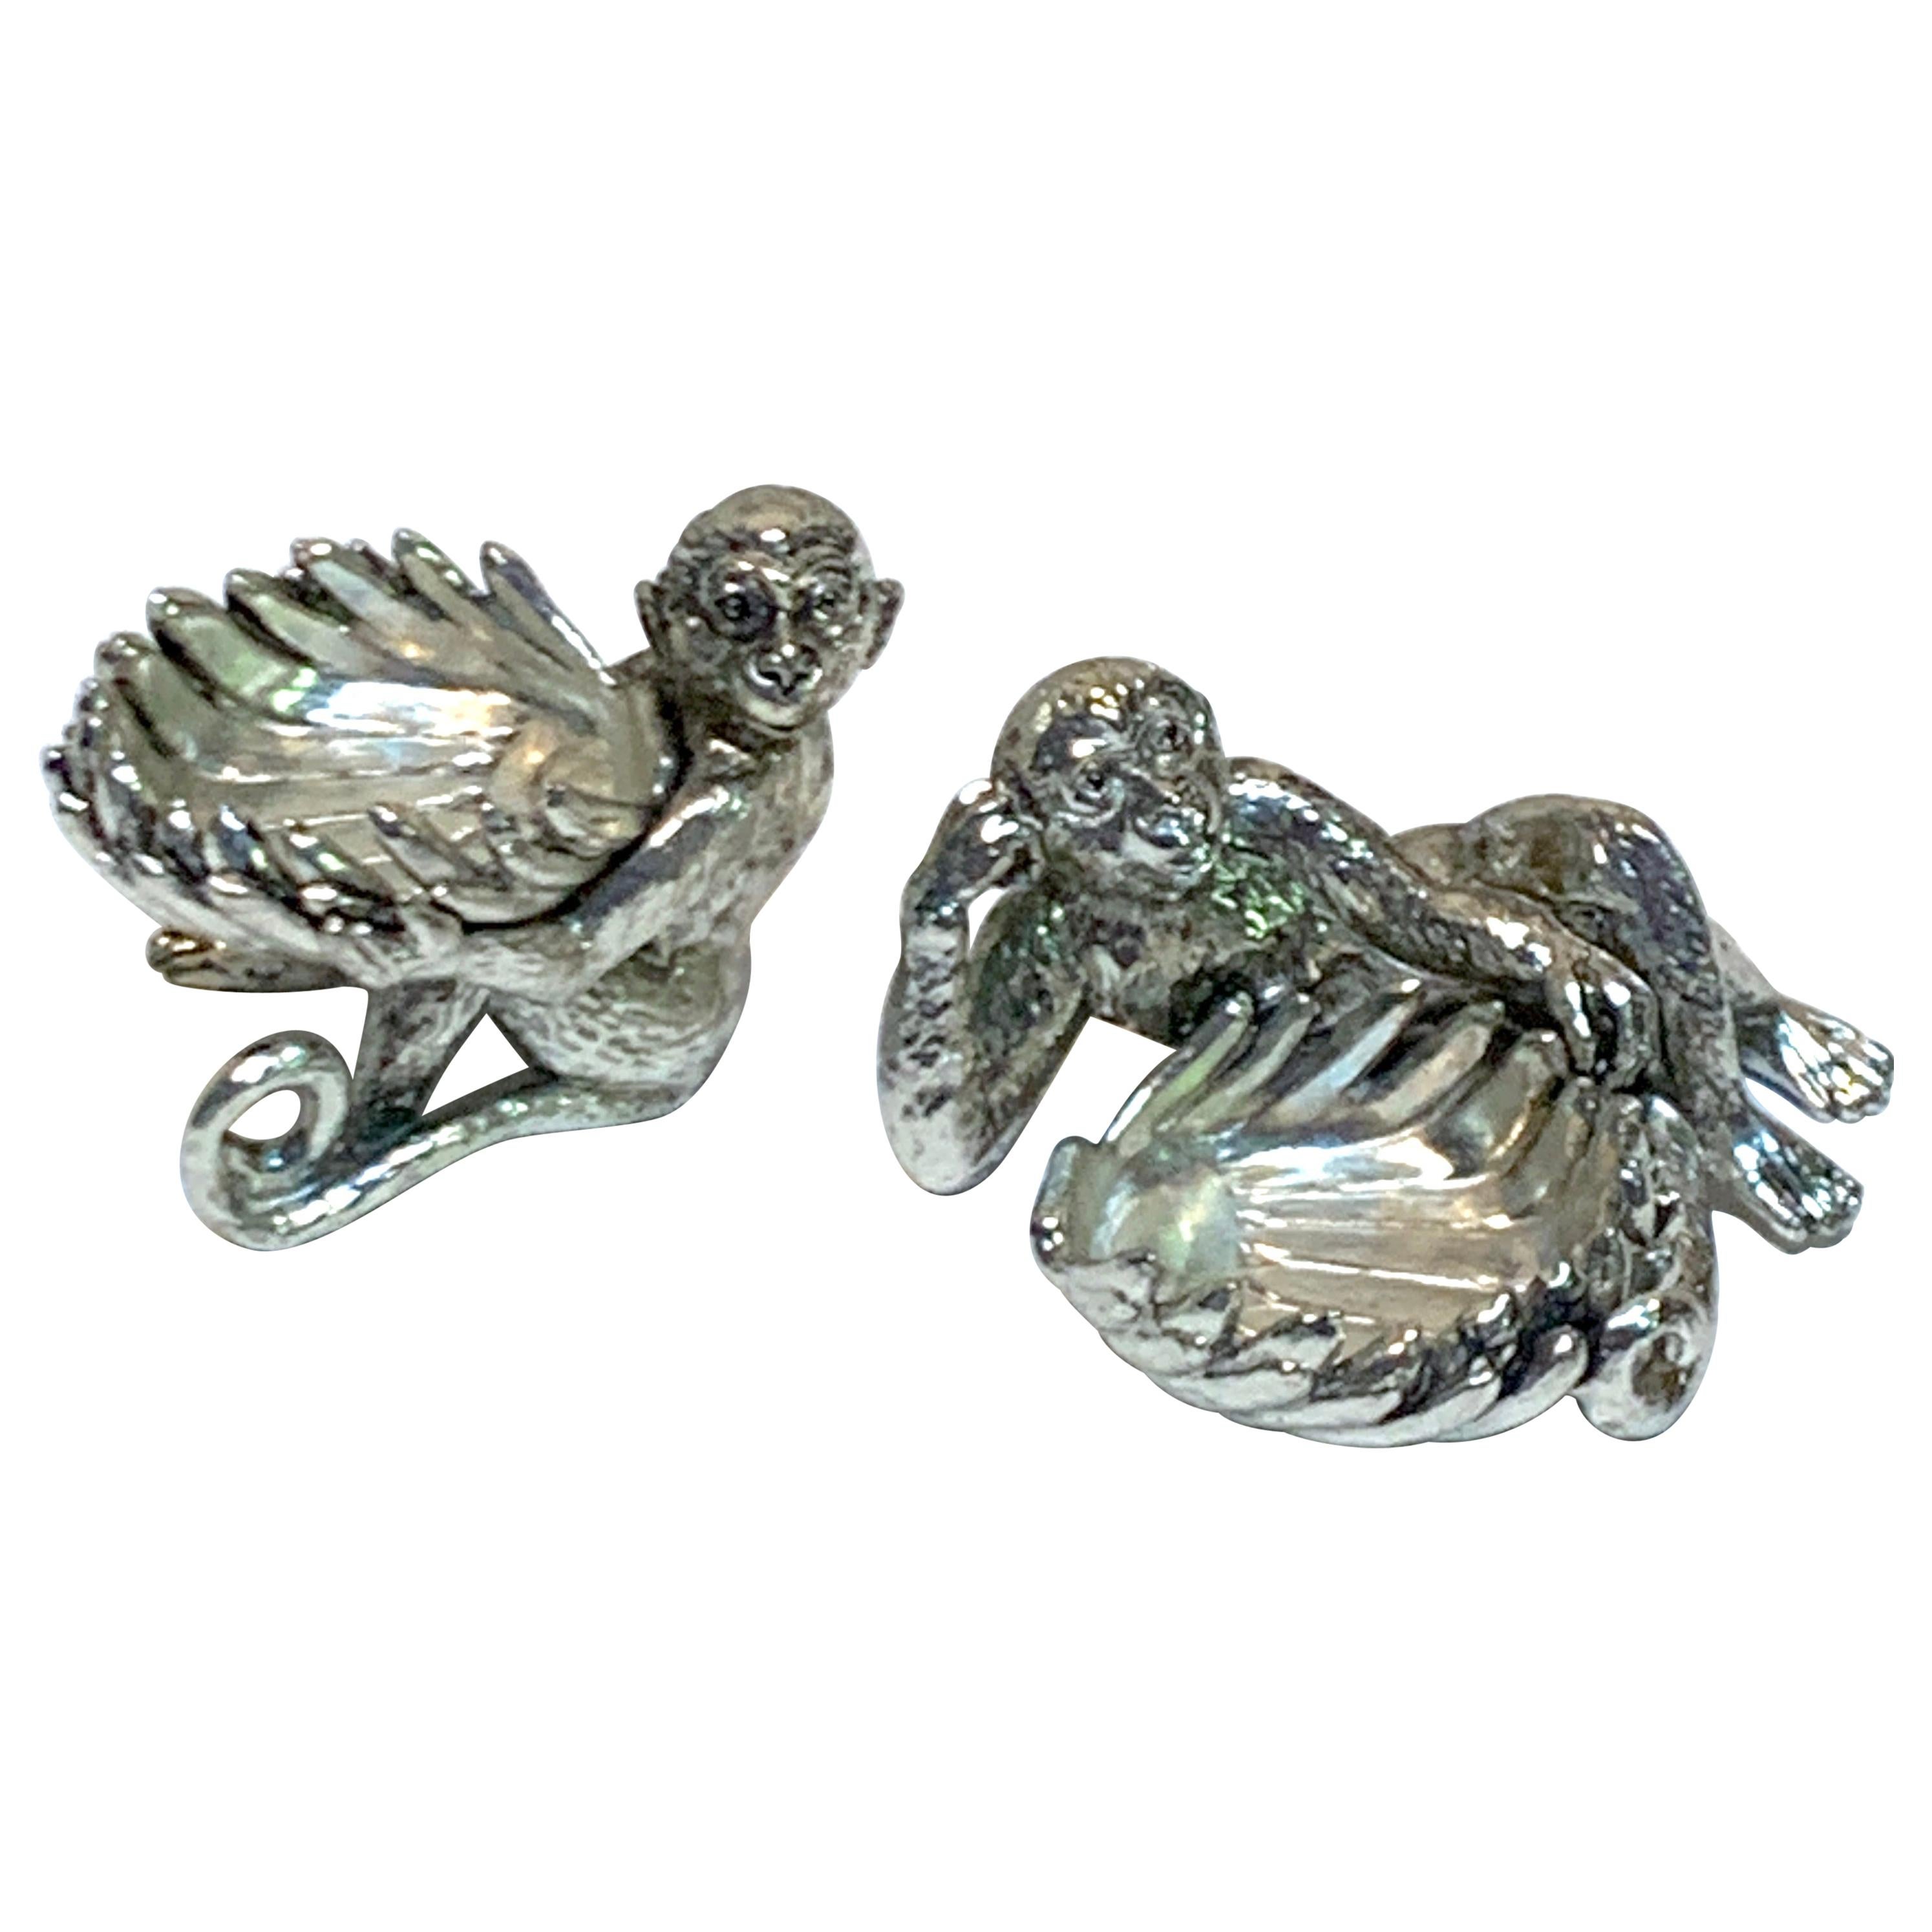 Pair of Silver Plated Reclining Monkey Salts or Nut Dishes For Sale